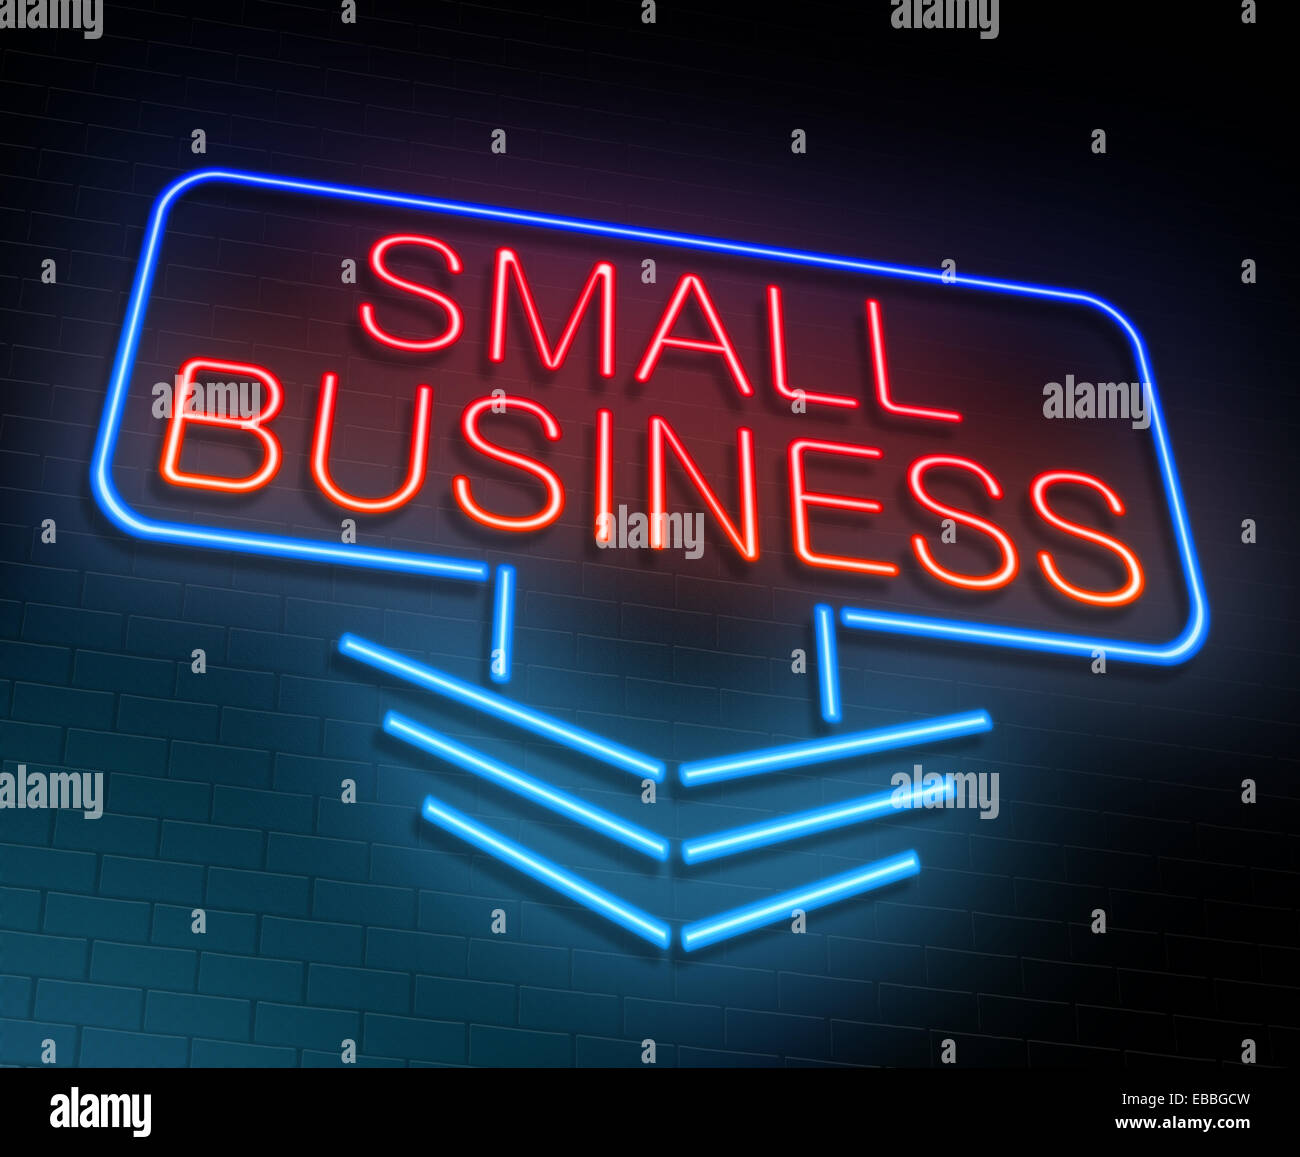 Small business concept. Stock Photo